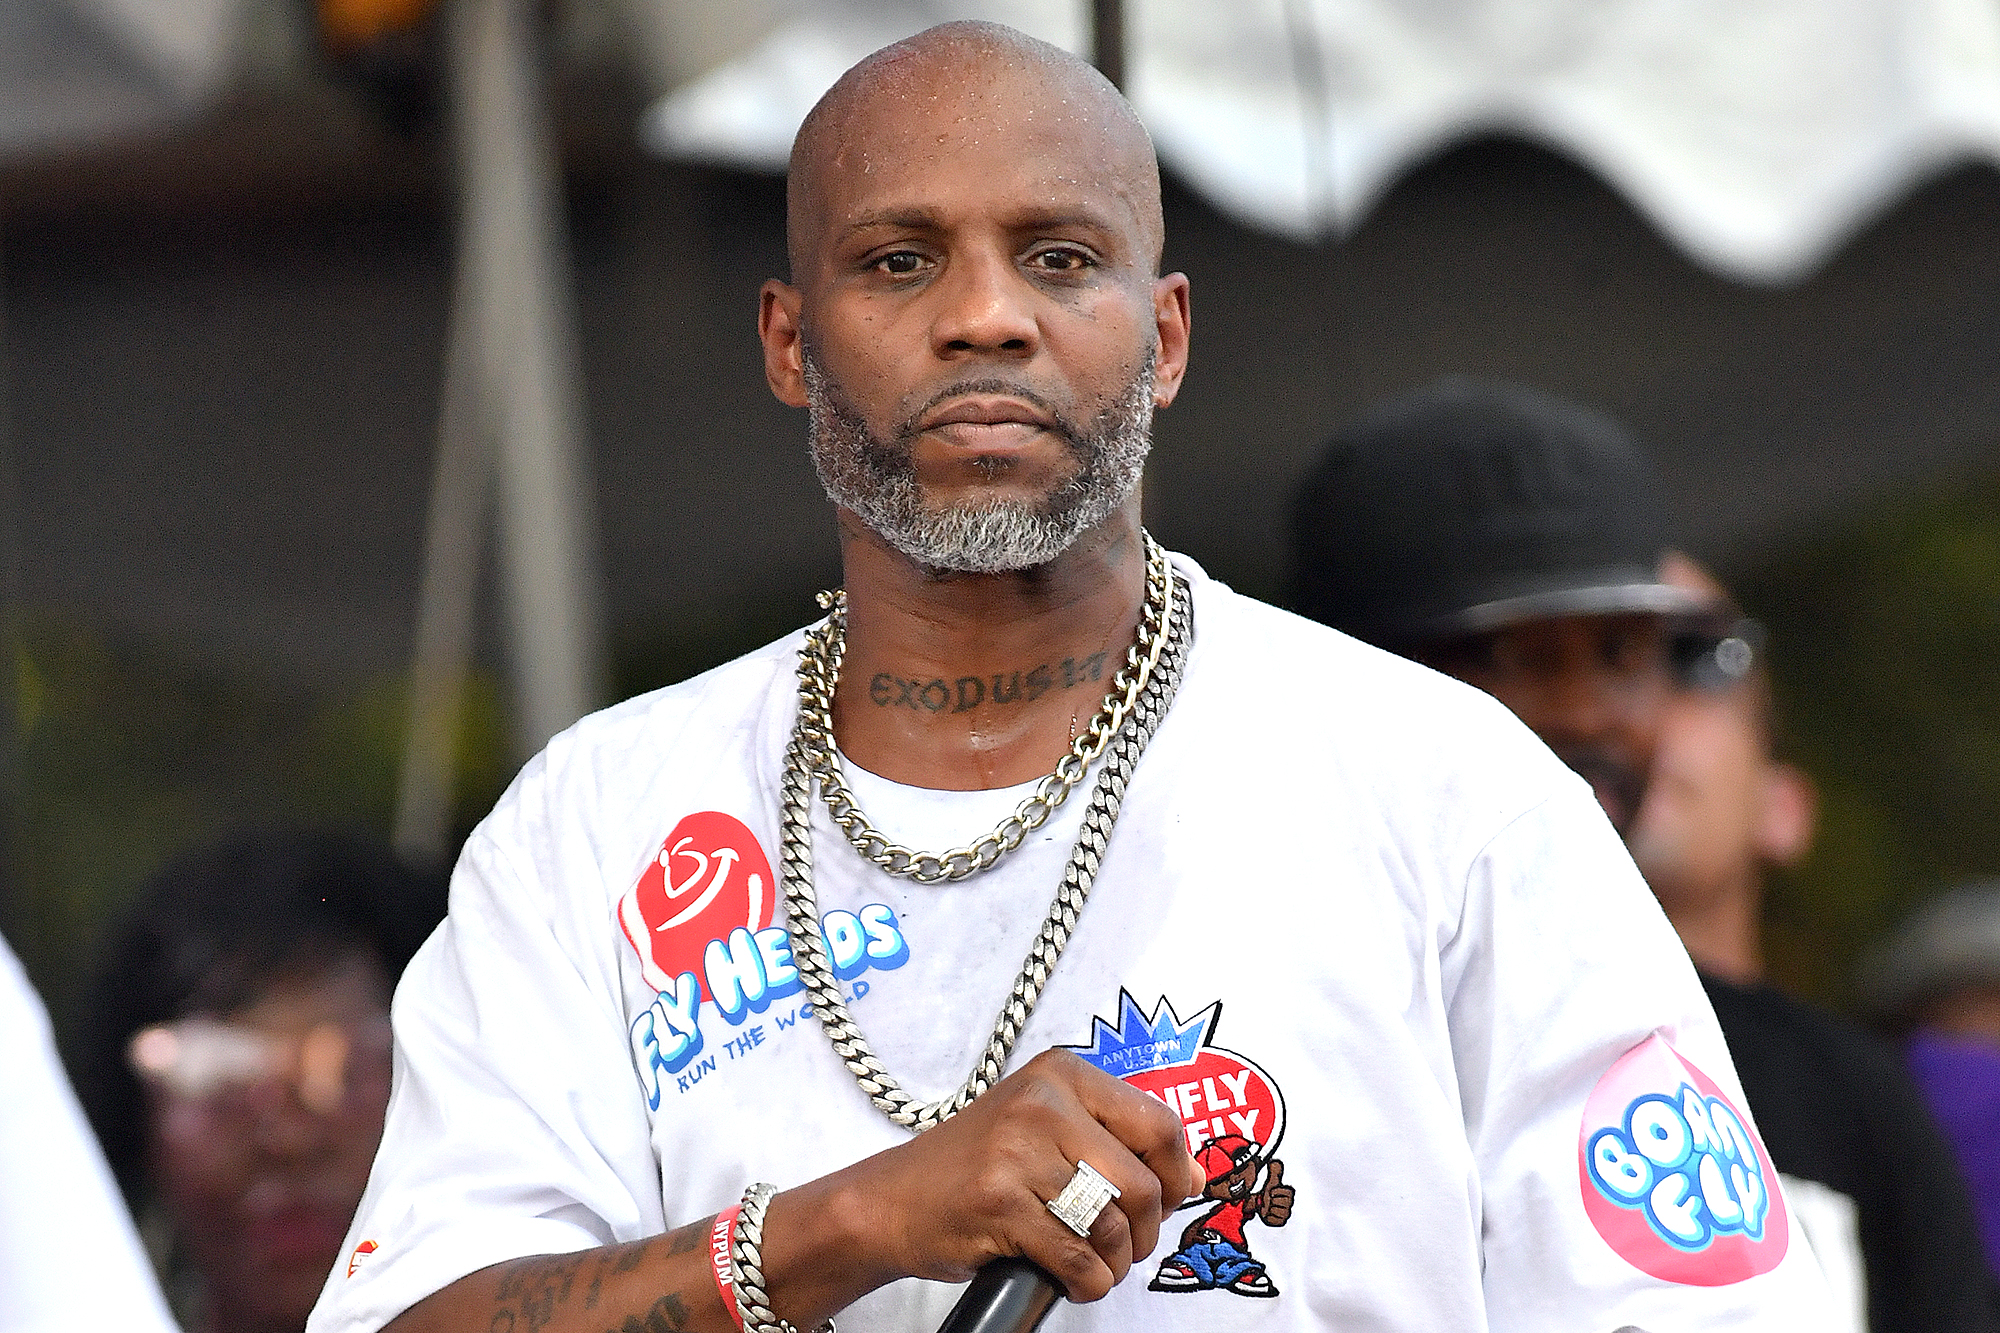 DMX’s Family May ‘PULL the PLUG’ As His Condition Worsens